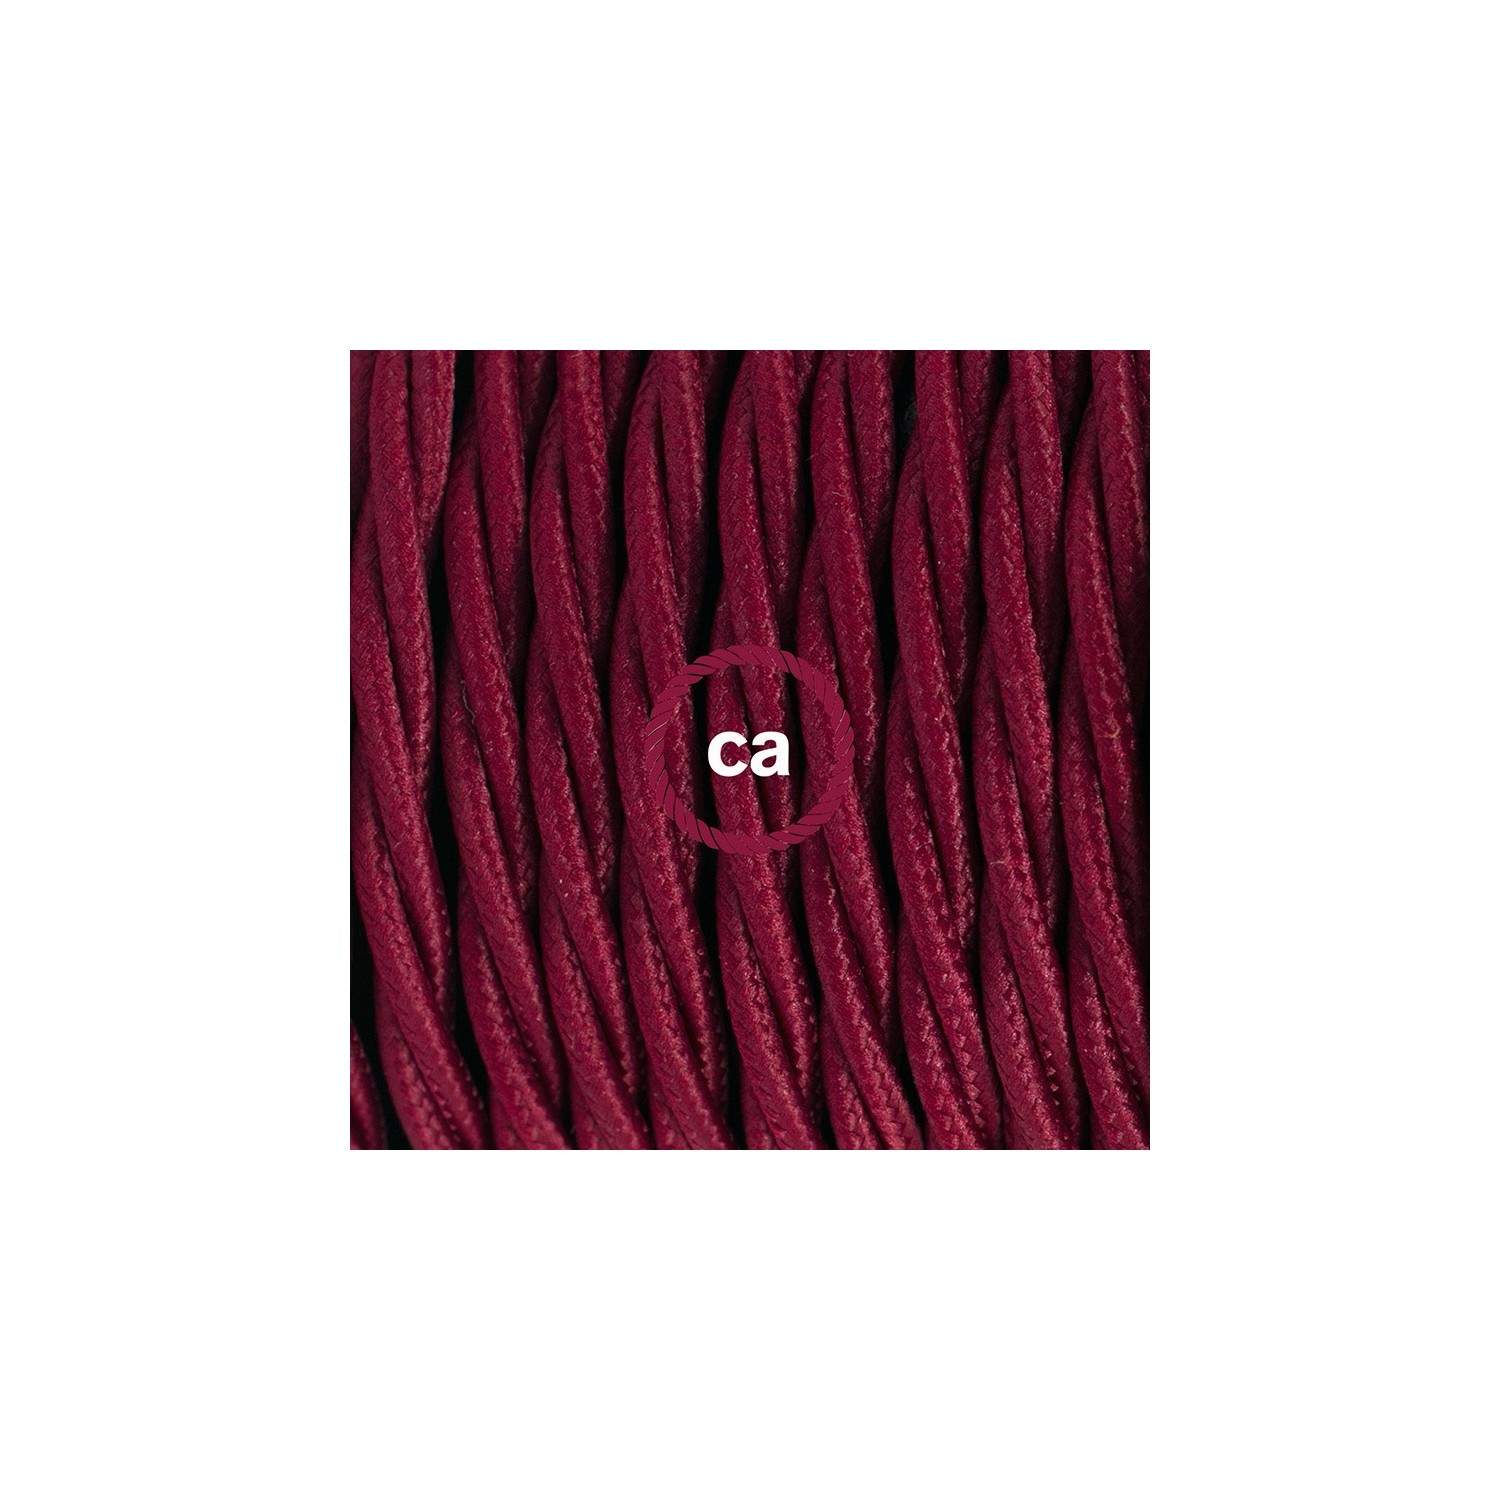 Create your TM19 Burgundy Rayon Snake and bring the light wherever you want.